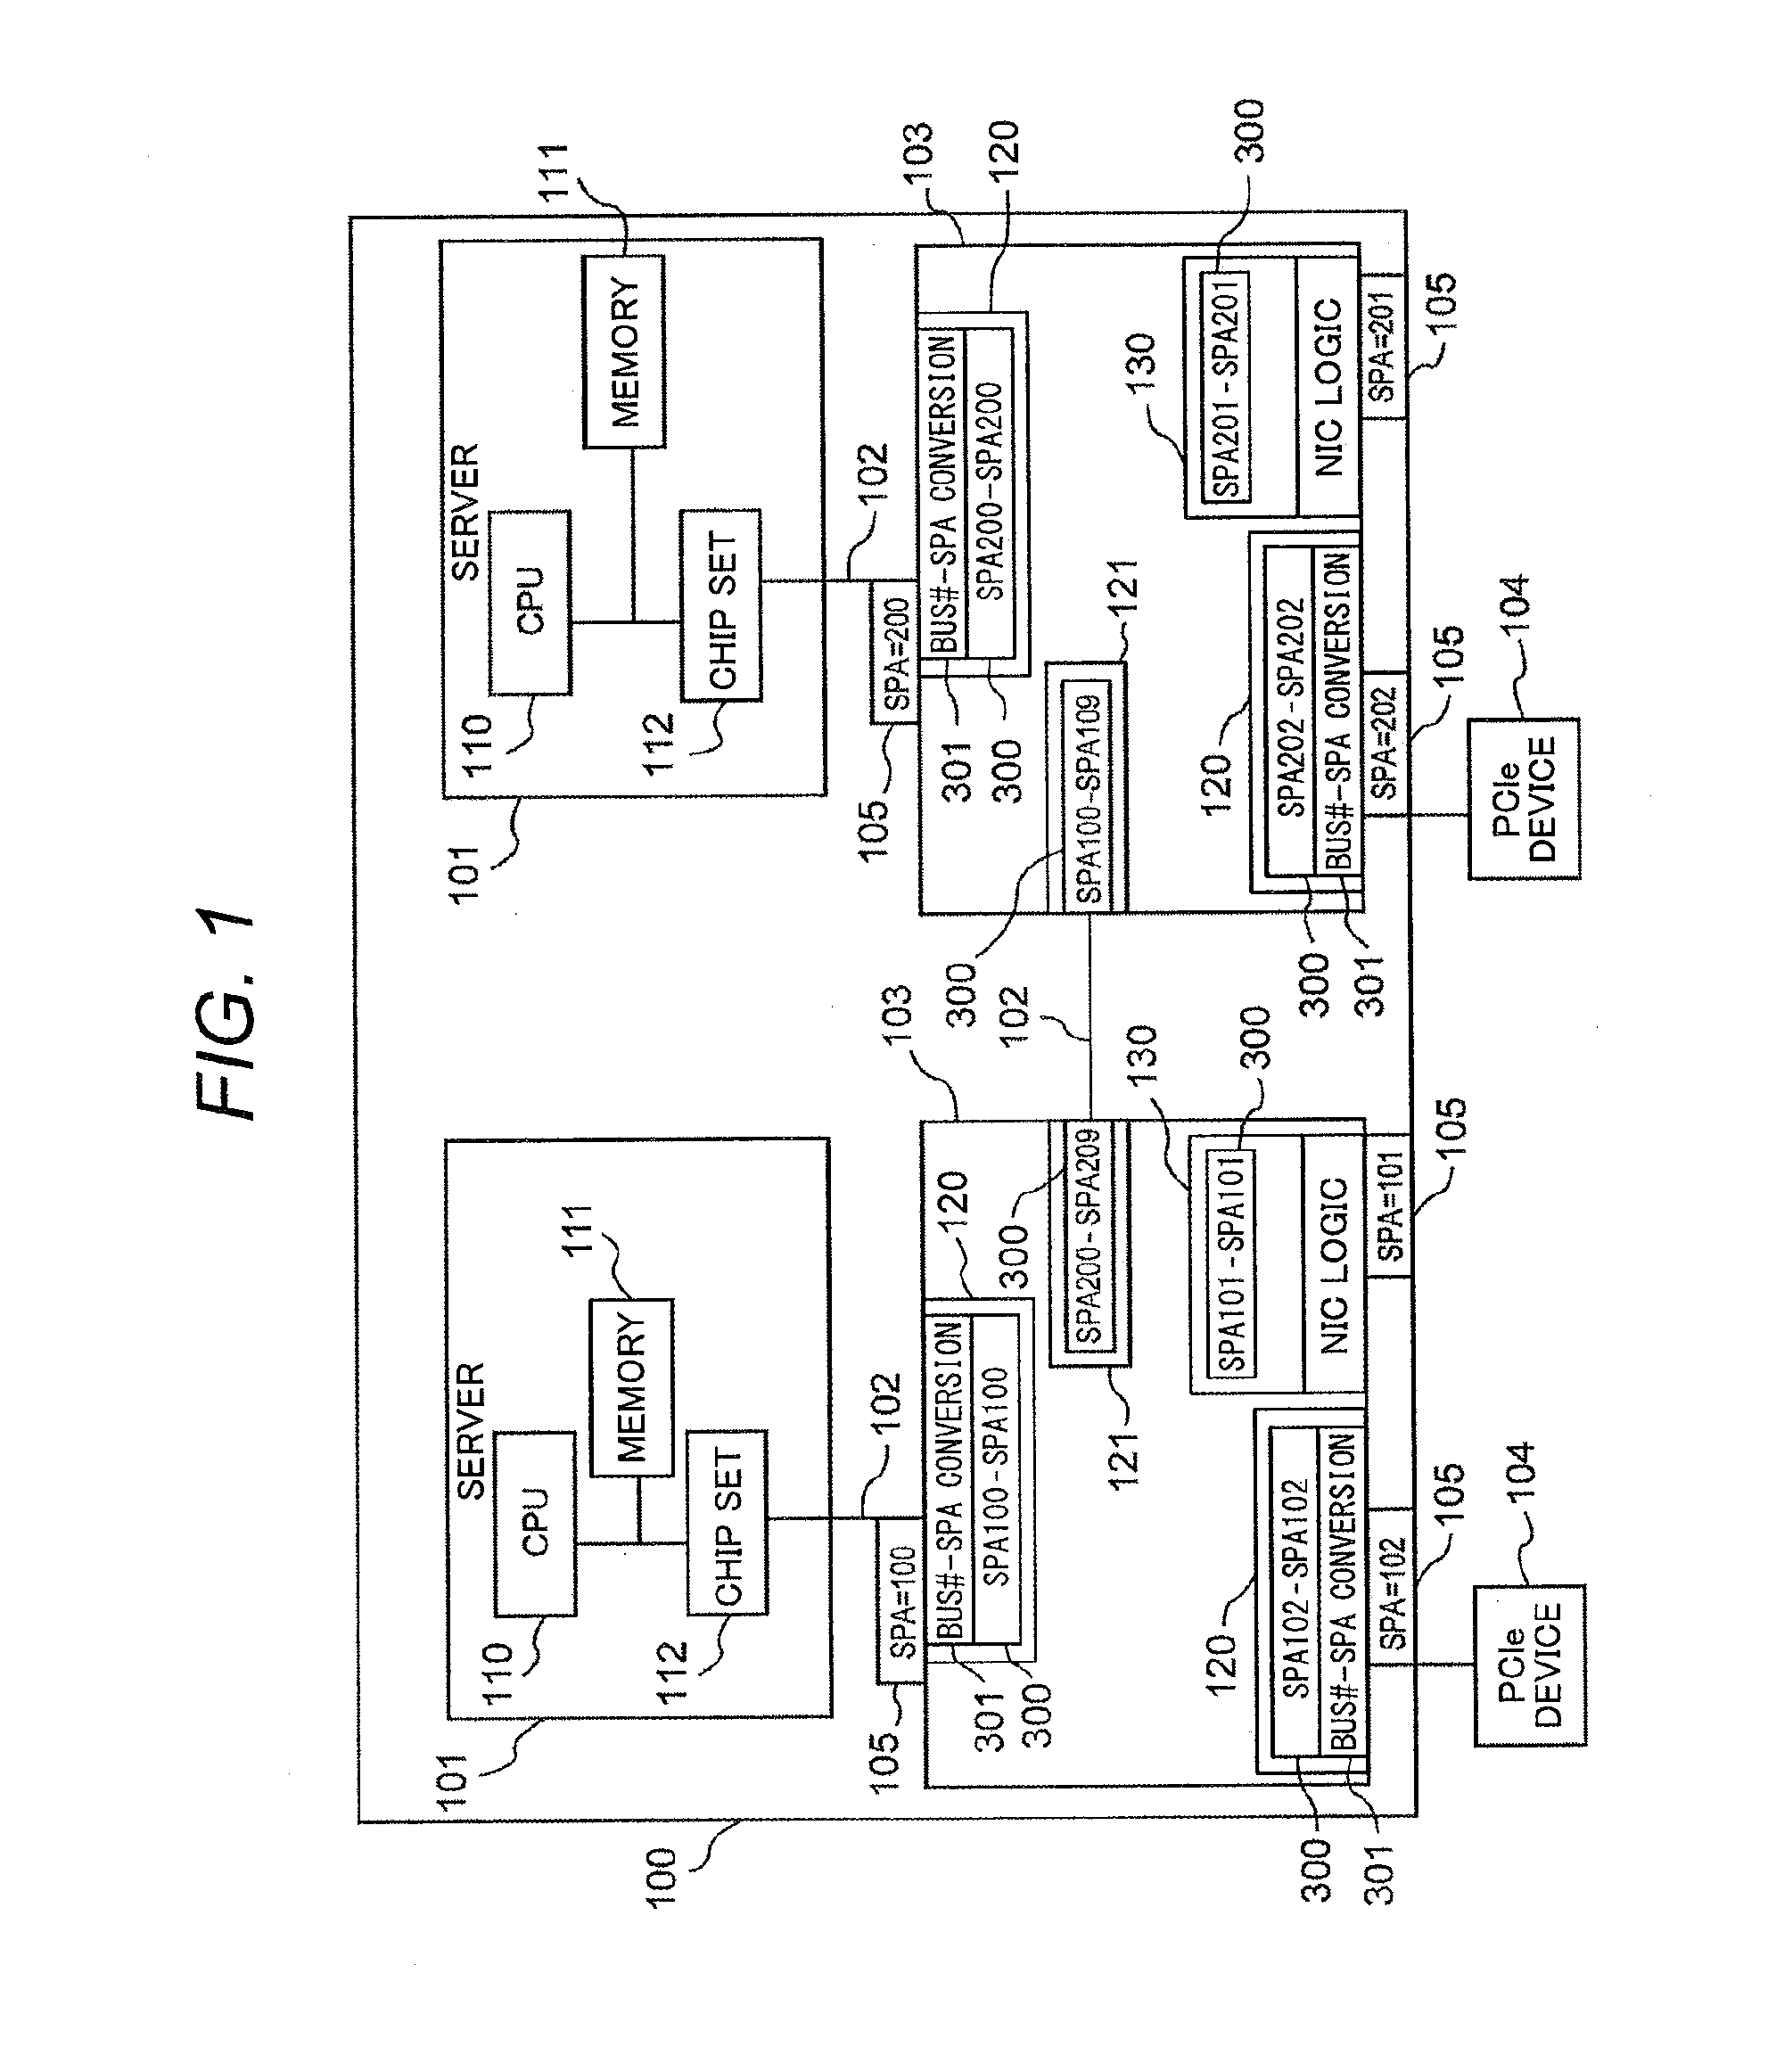 Computer system and method for communicating data between computers